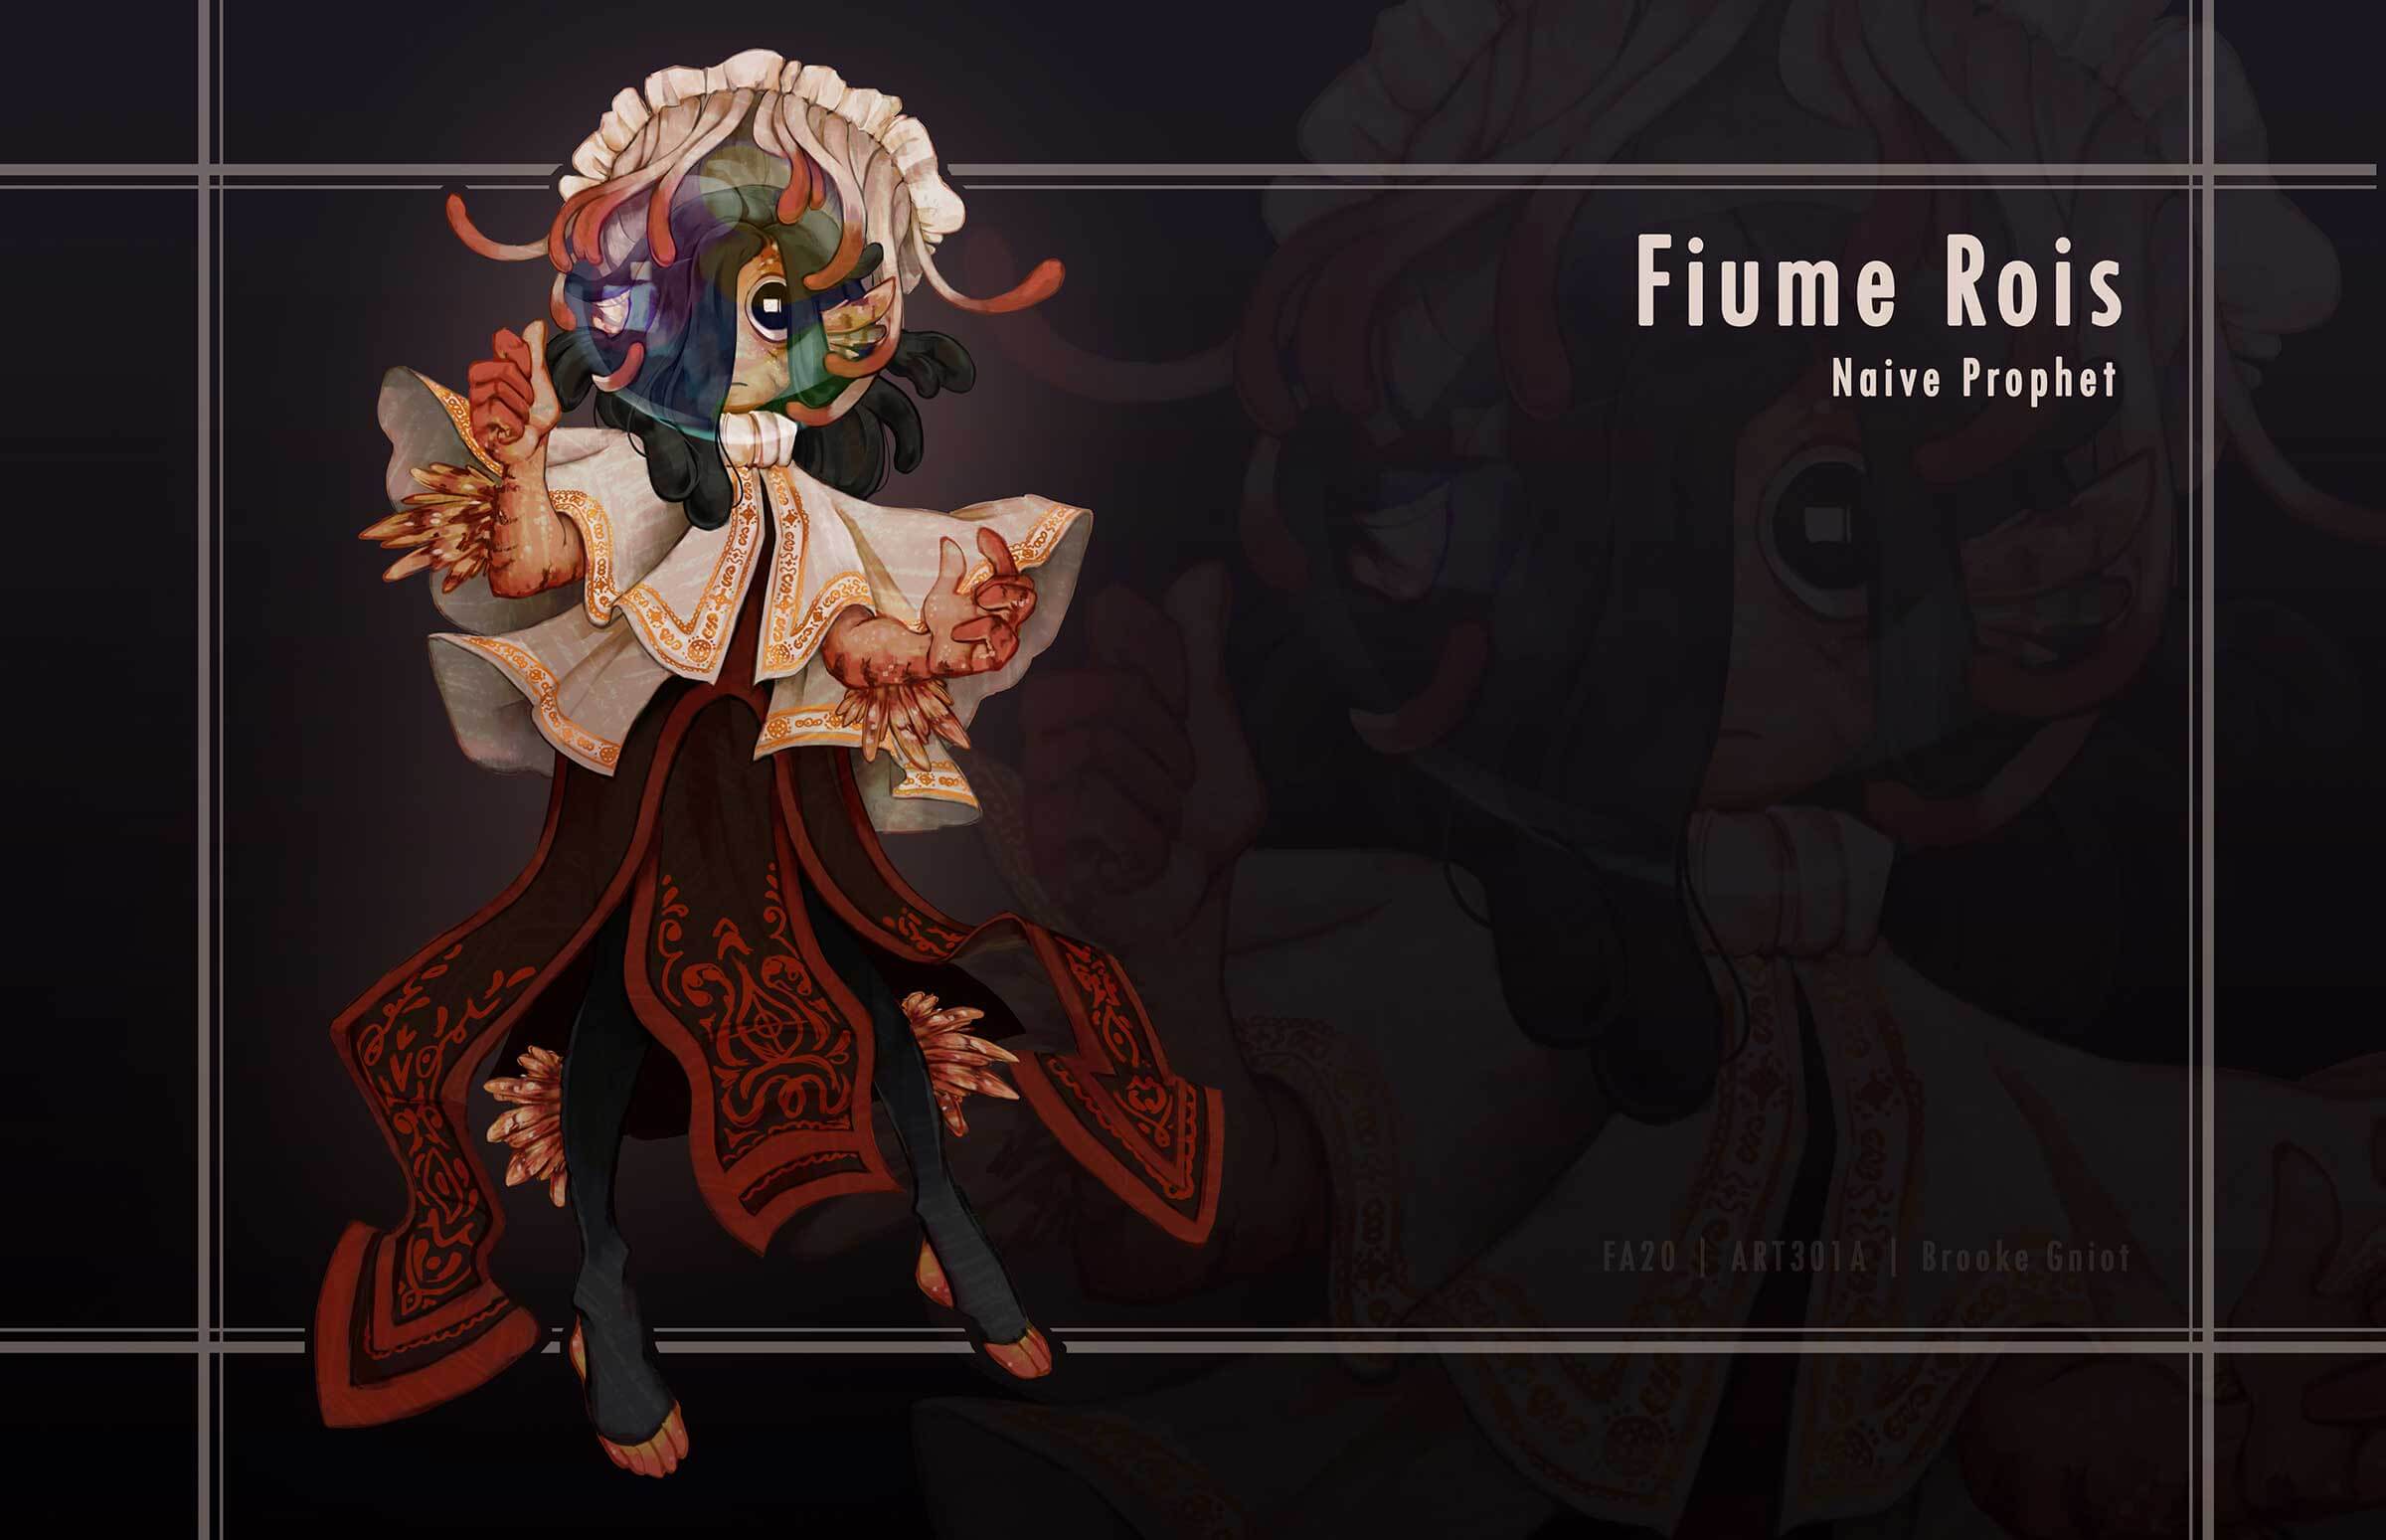 Character art of the prophet character Fiume Rois.